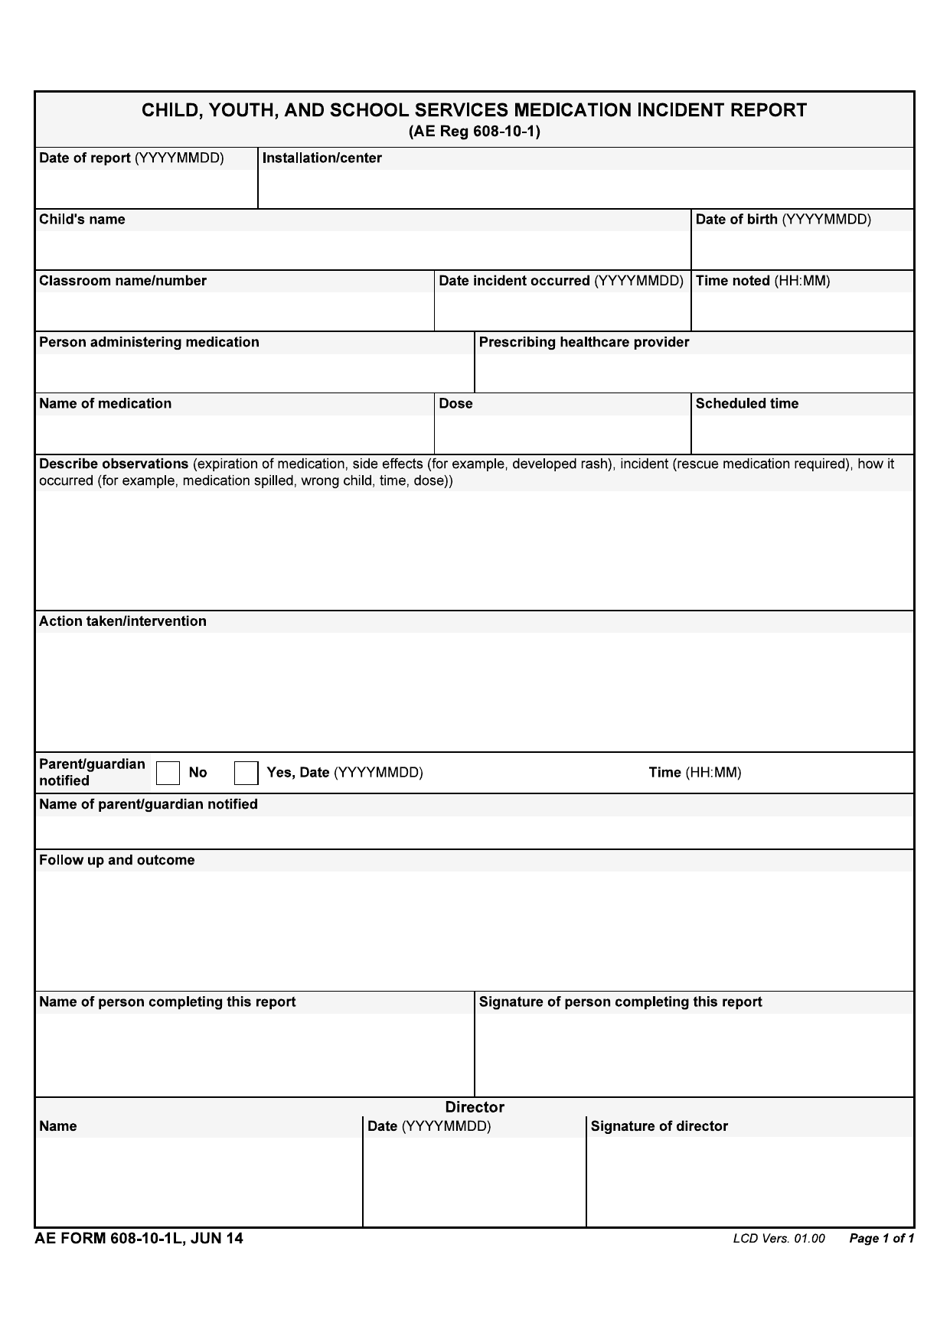 AE Form 608-10-1L Child Youth and School Services Medication Incident Report, Page 1